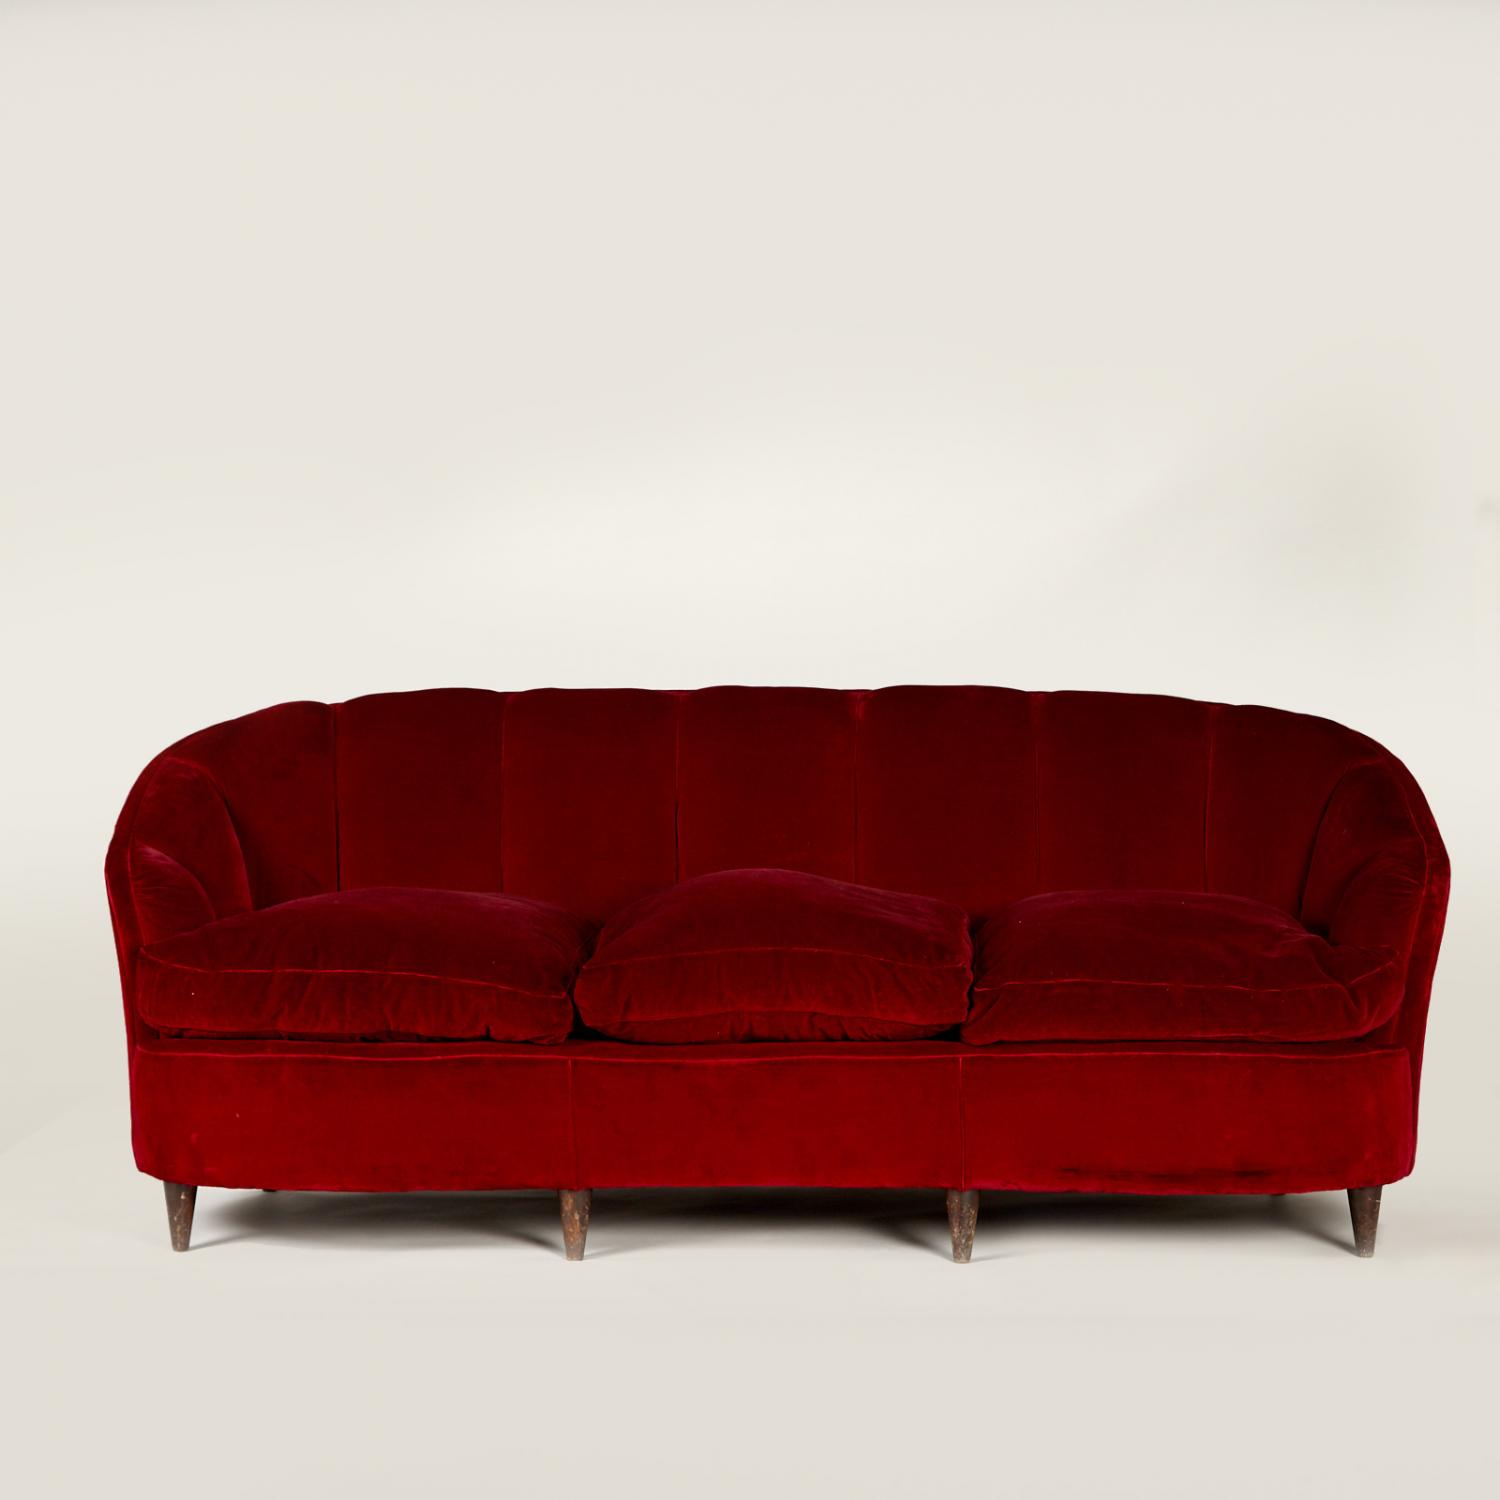 Over het algemeen Knipoog band An Exceptional Midcentury Gio Ponti Sofa